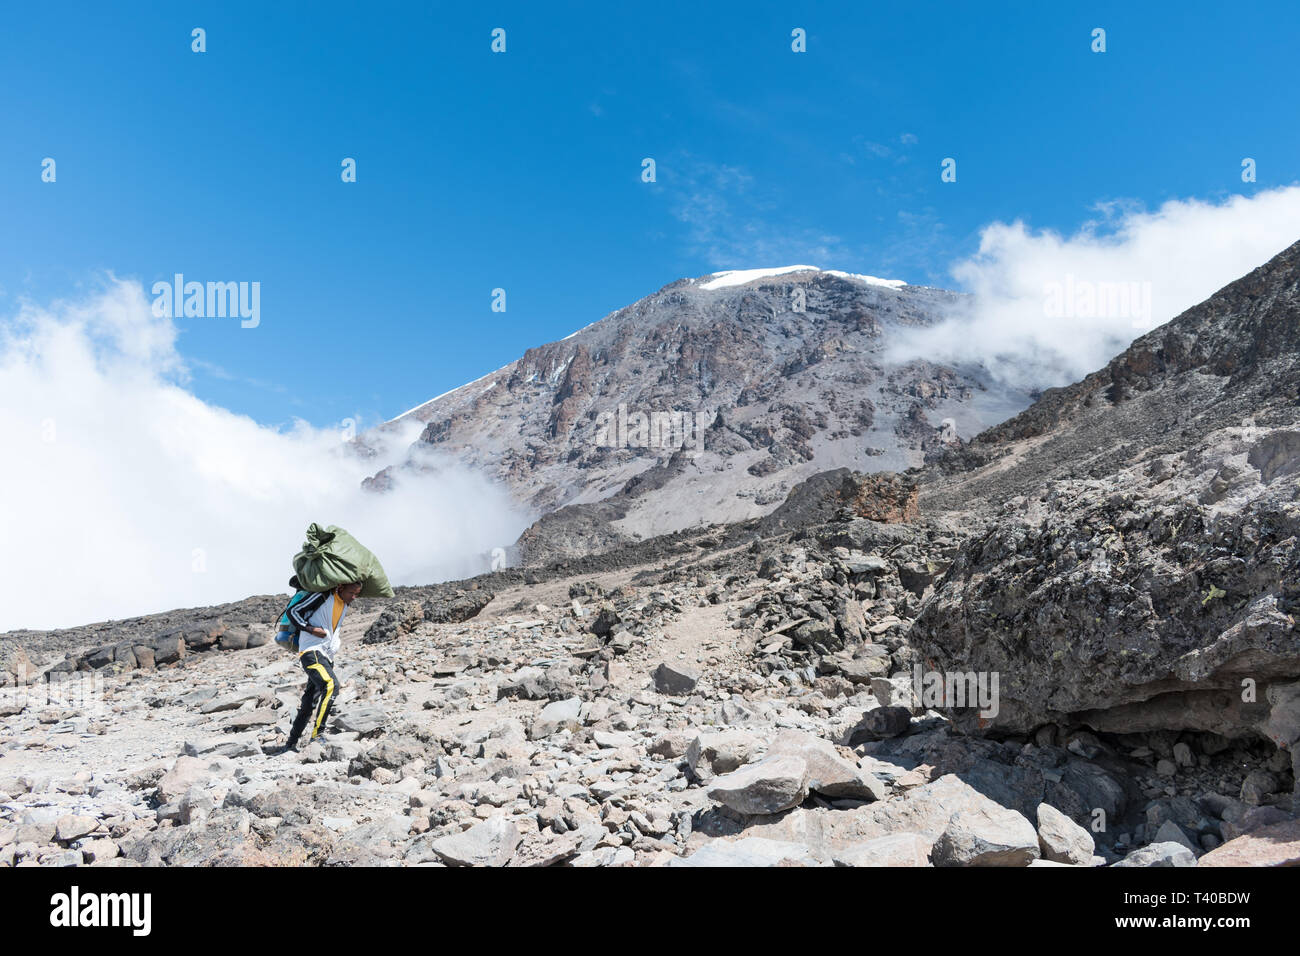 A single male porter carries a heavy load on his back and head in the hot sun on a clear and cloudy day. Summit of Kilimanjaro is in the background. Stock Photo